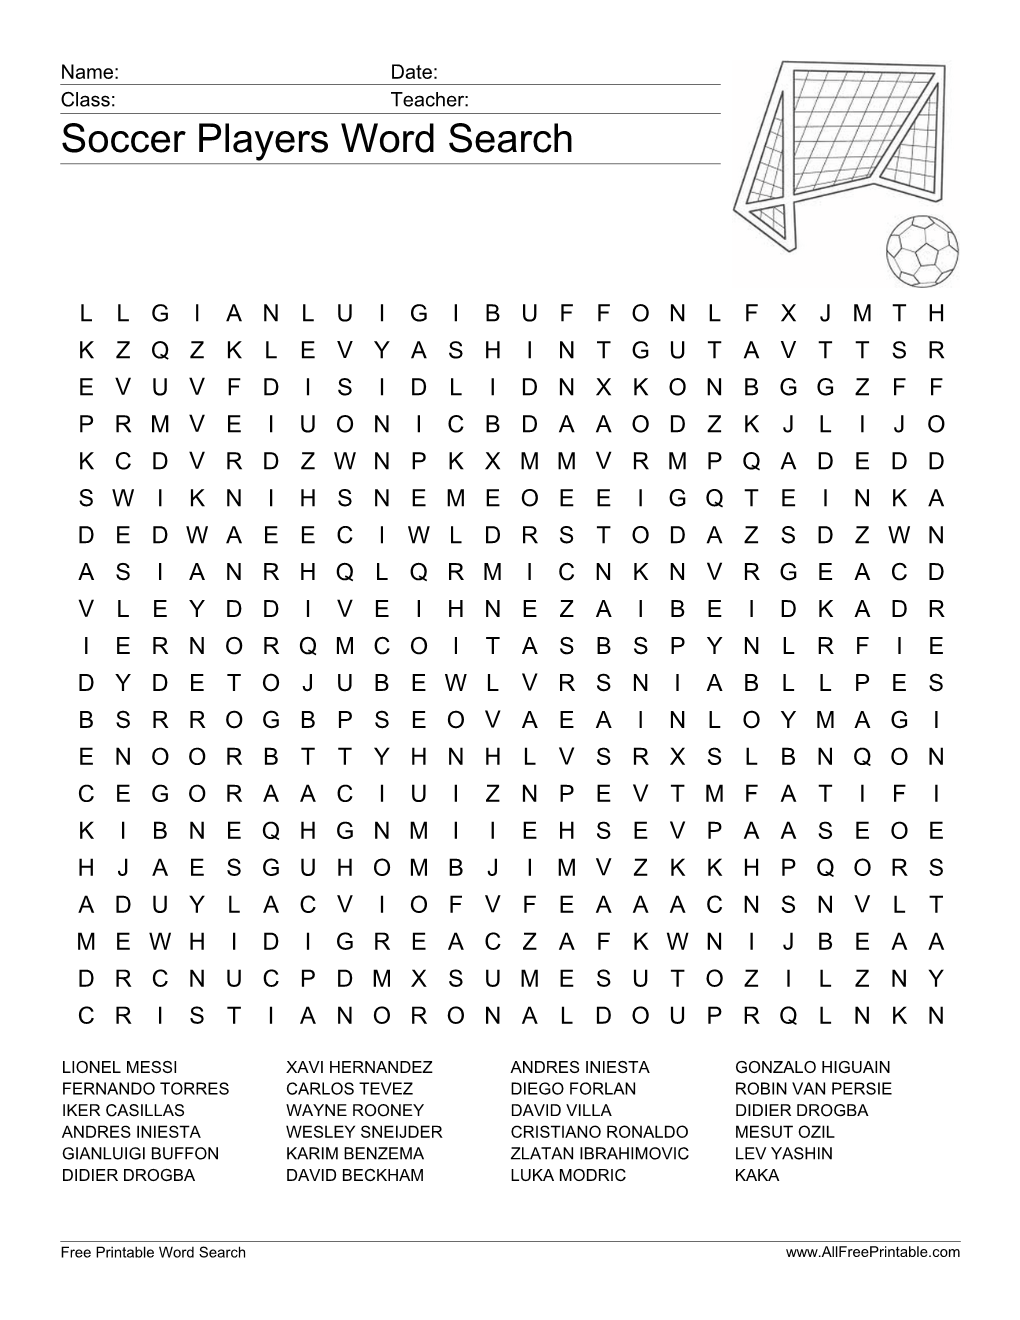 Soccer Players Word Search